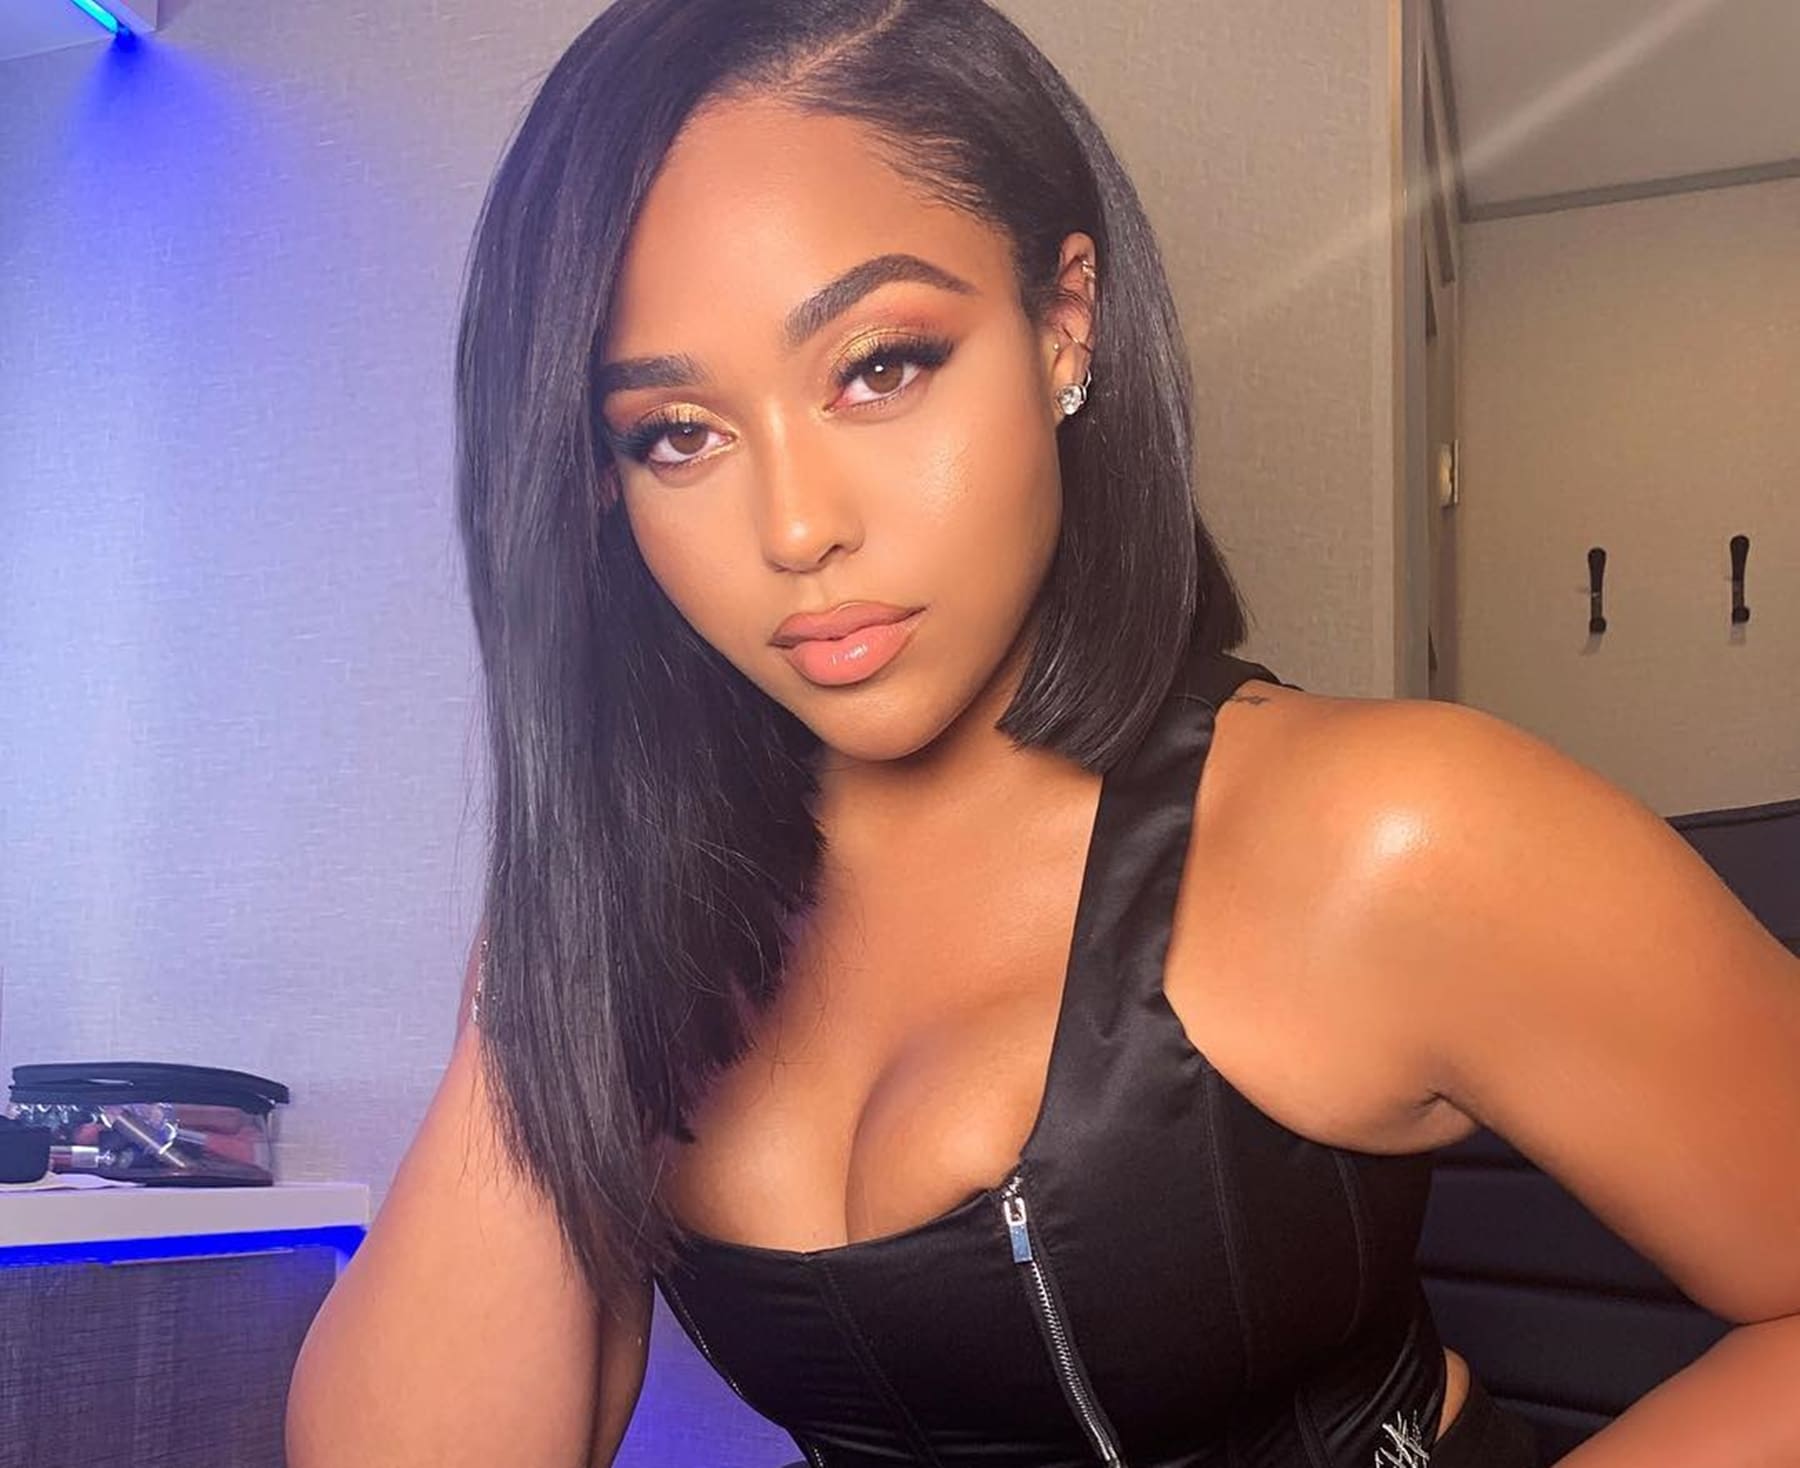 Jordyn Woods Shares Another Video Featuring Her Mom That Has Fans In Awe